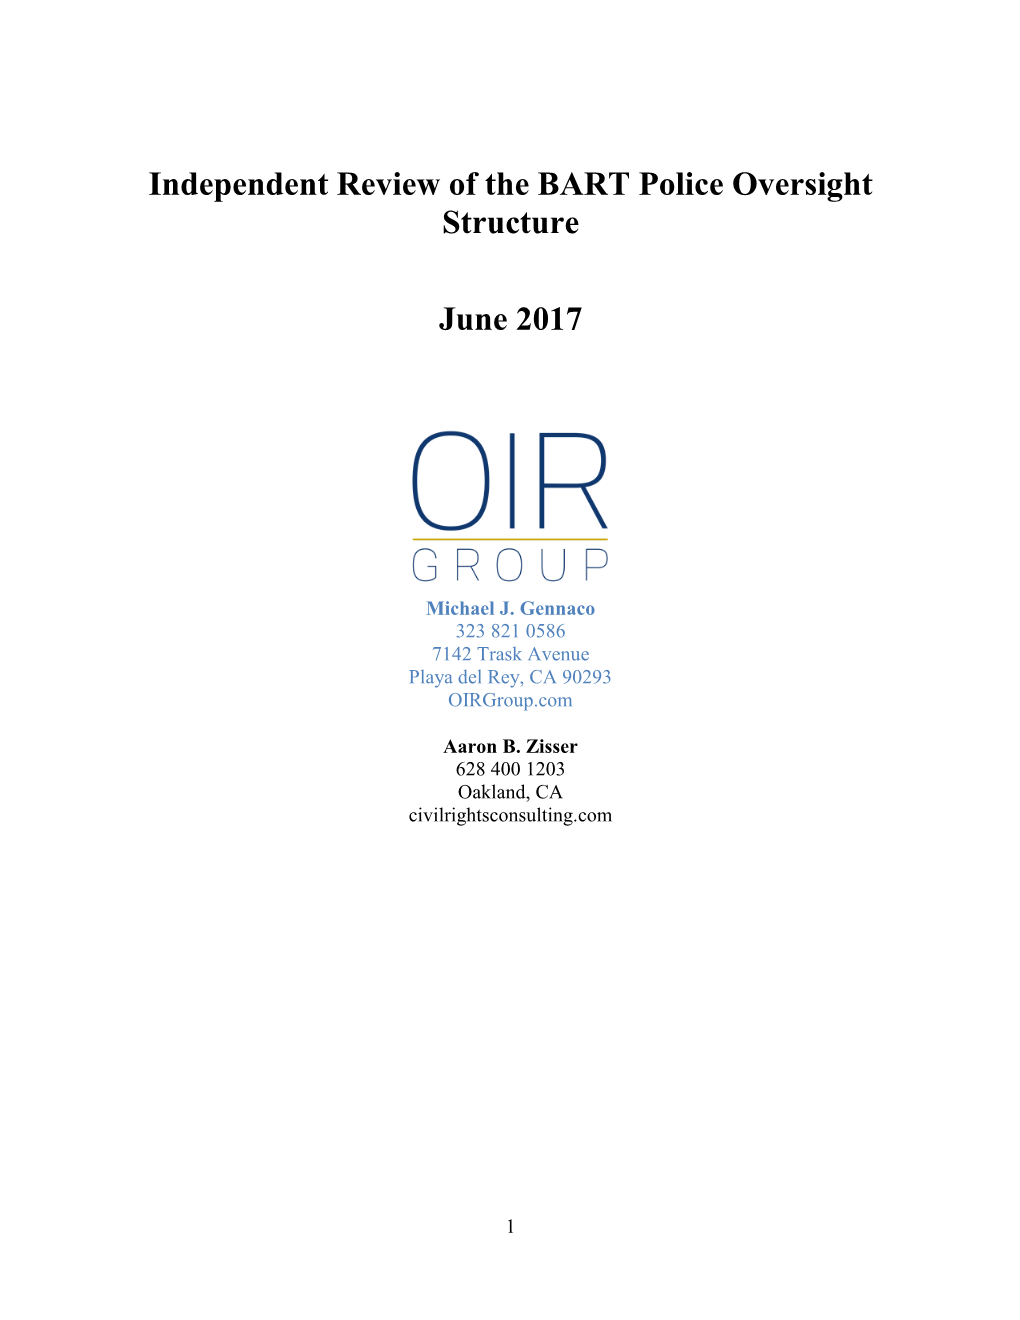 Independent Review of the BART Police Oversight Structure June 2017